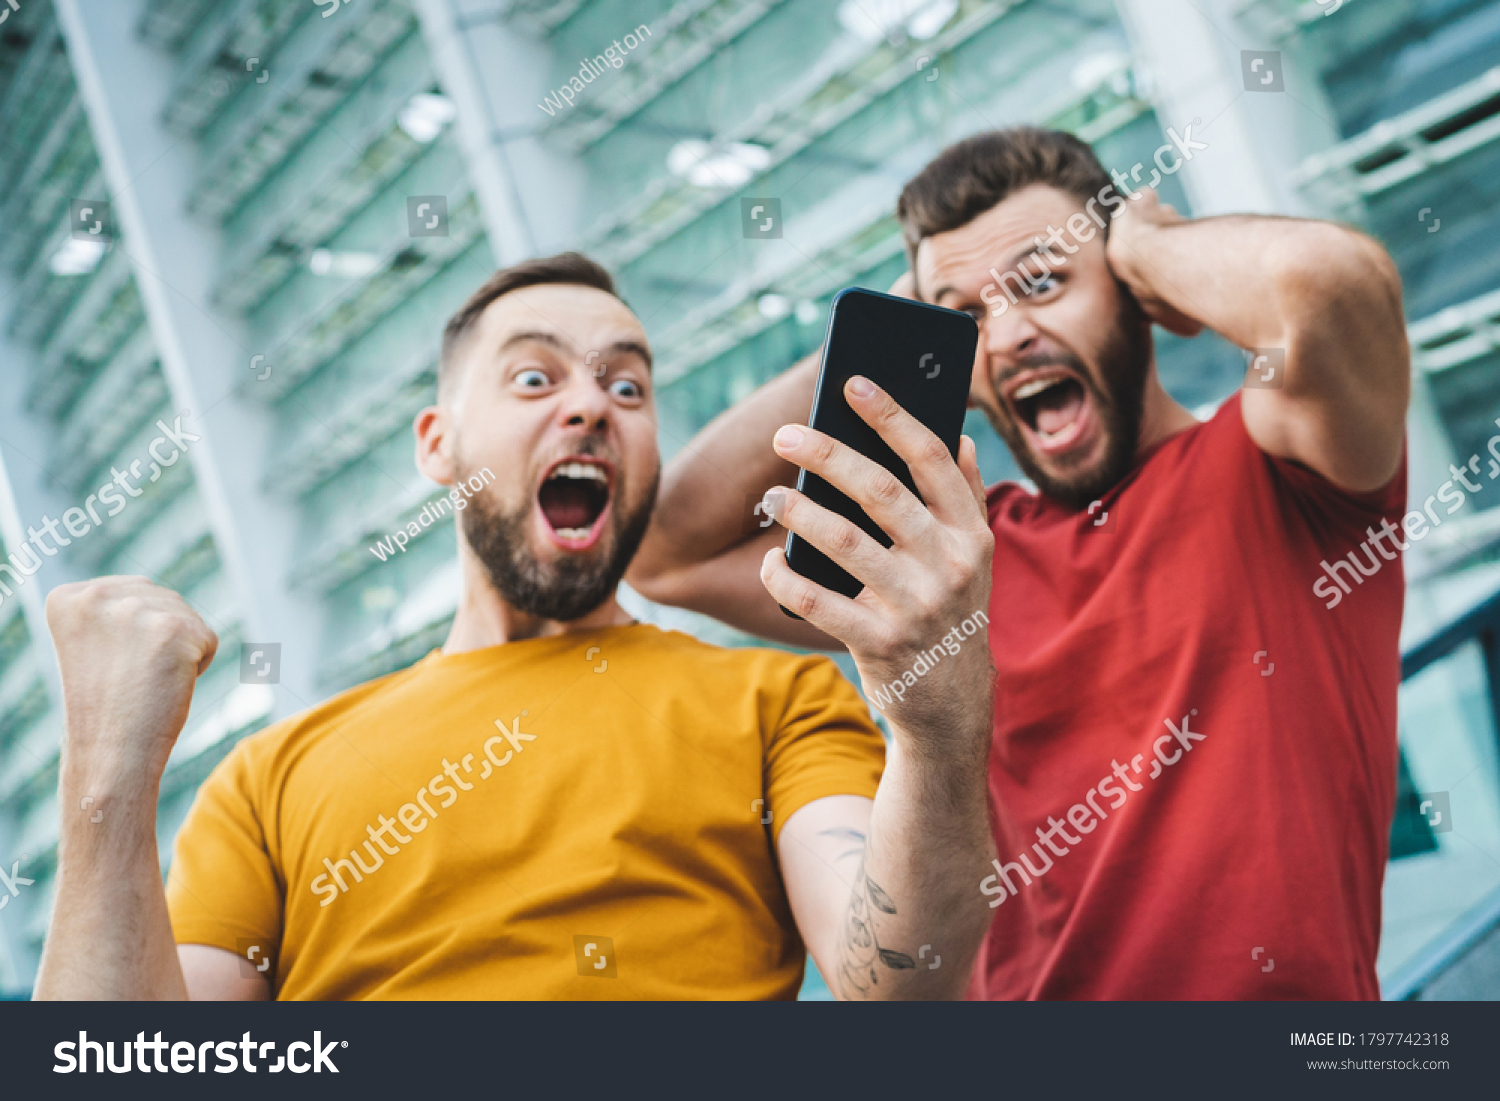 Two friends showing sincere emotions of joy about victory in online lottery. Men being happy winning a bet in online sport gambling application with football stadium on the background. #1797742318